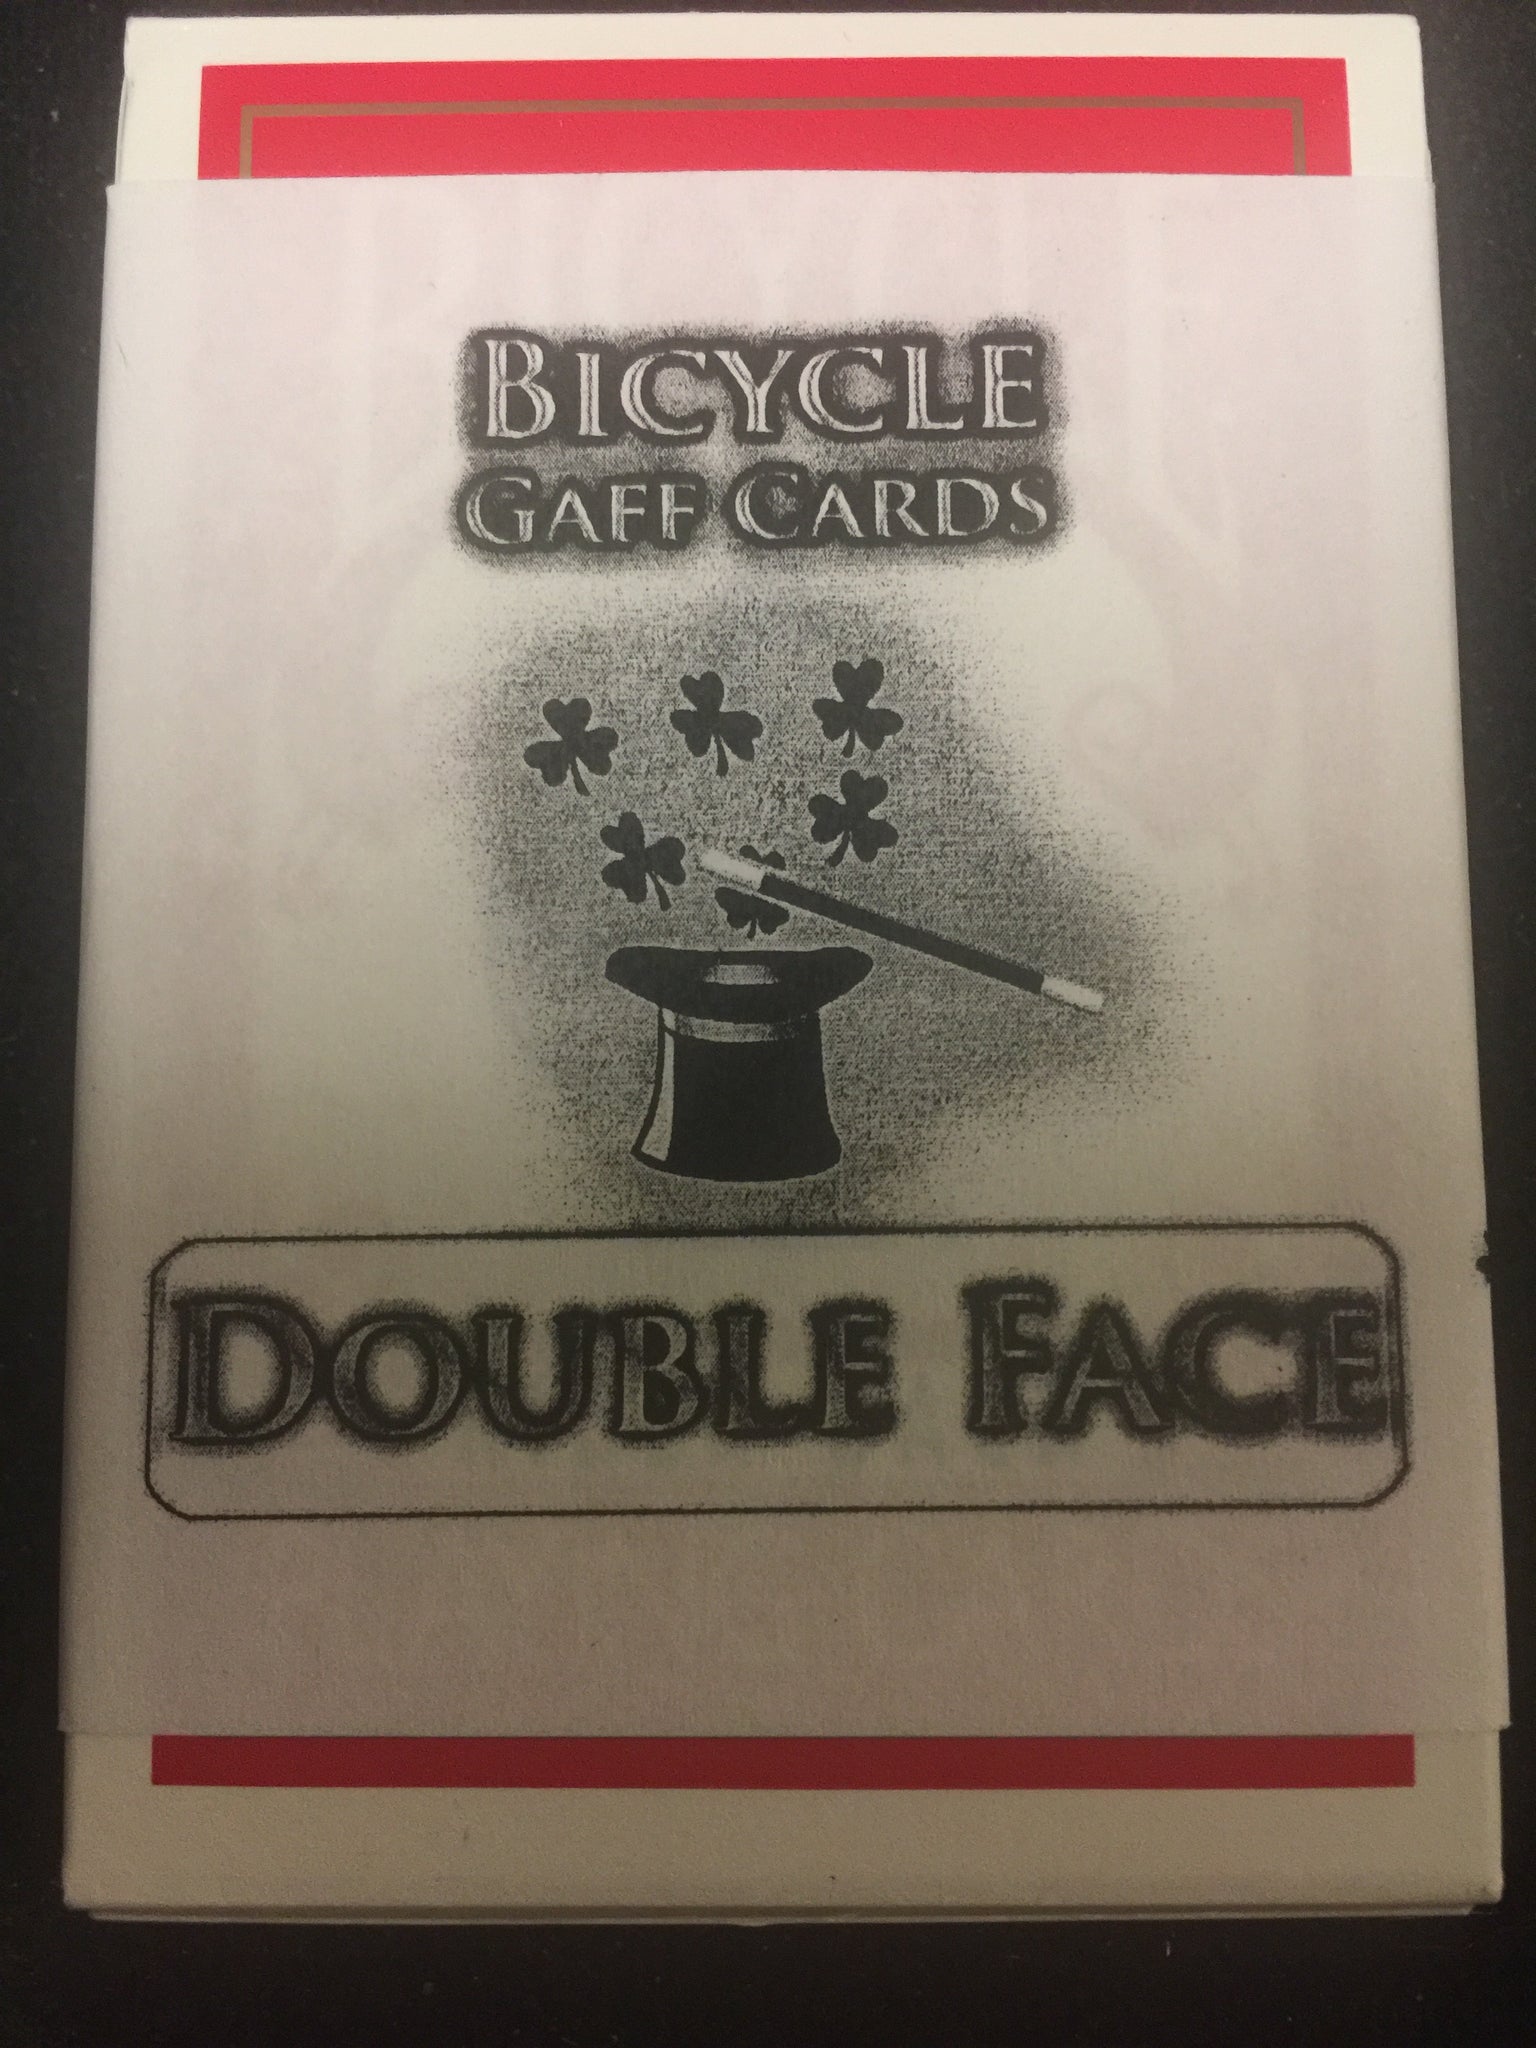 Bicycle Double Face Gaff cards - Titan Magic & Brain Busters Escape Rooms